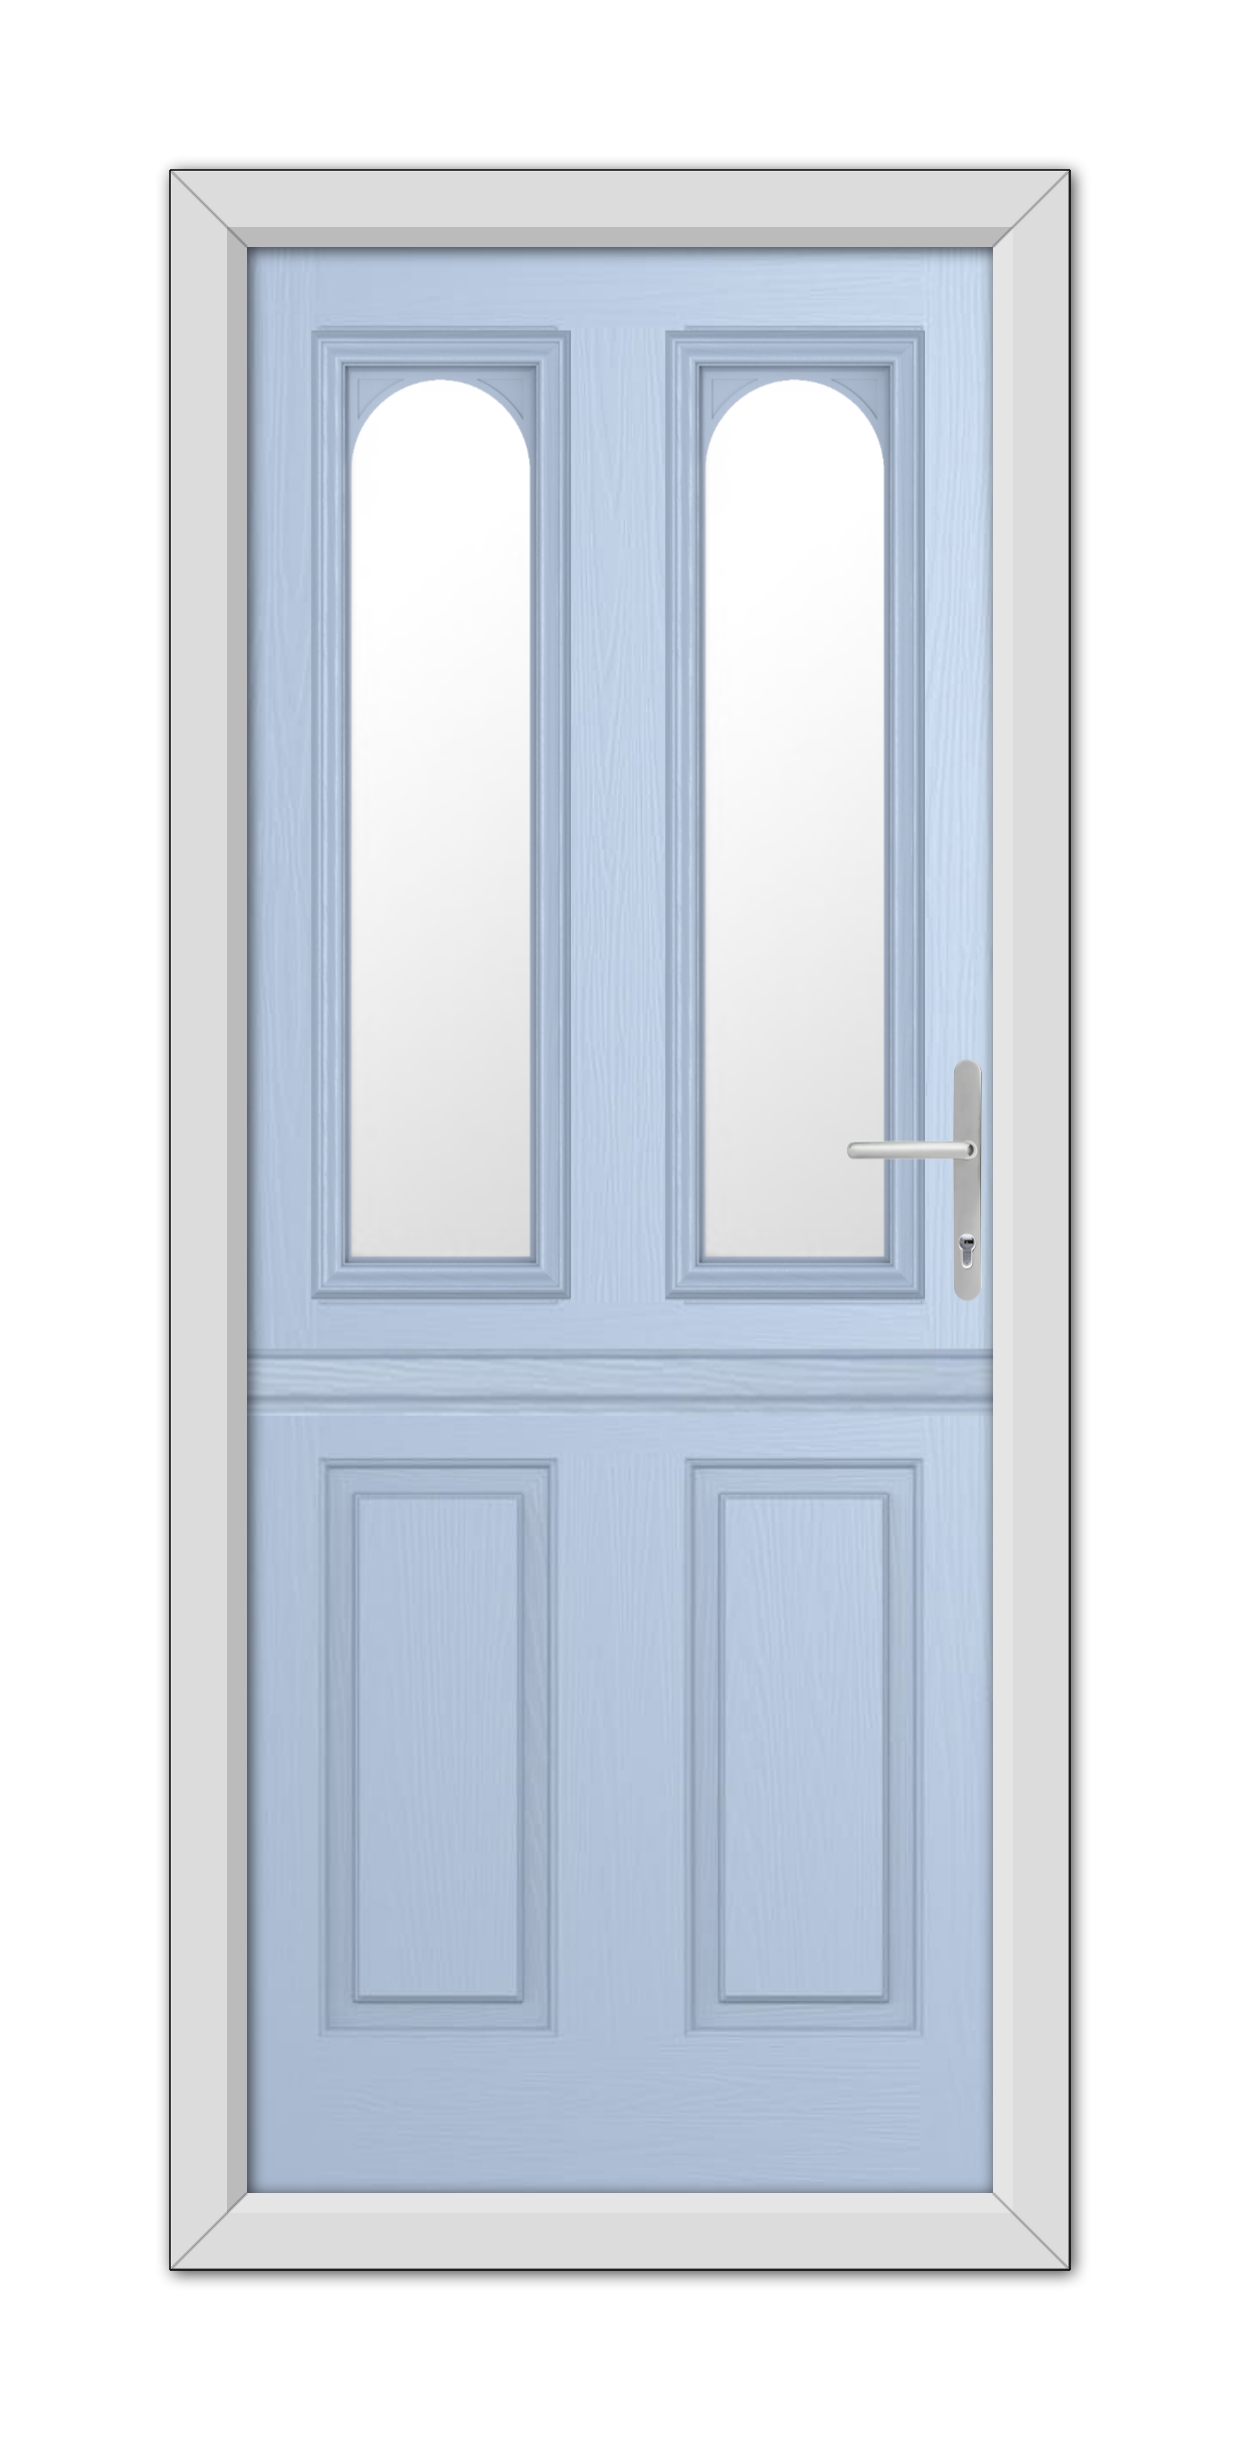 A Duck Egg Blue Elmhurst Stable Composite Door with long, narrow windows in each panel and a simple white handle, set within a white door frame.